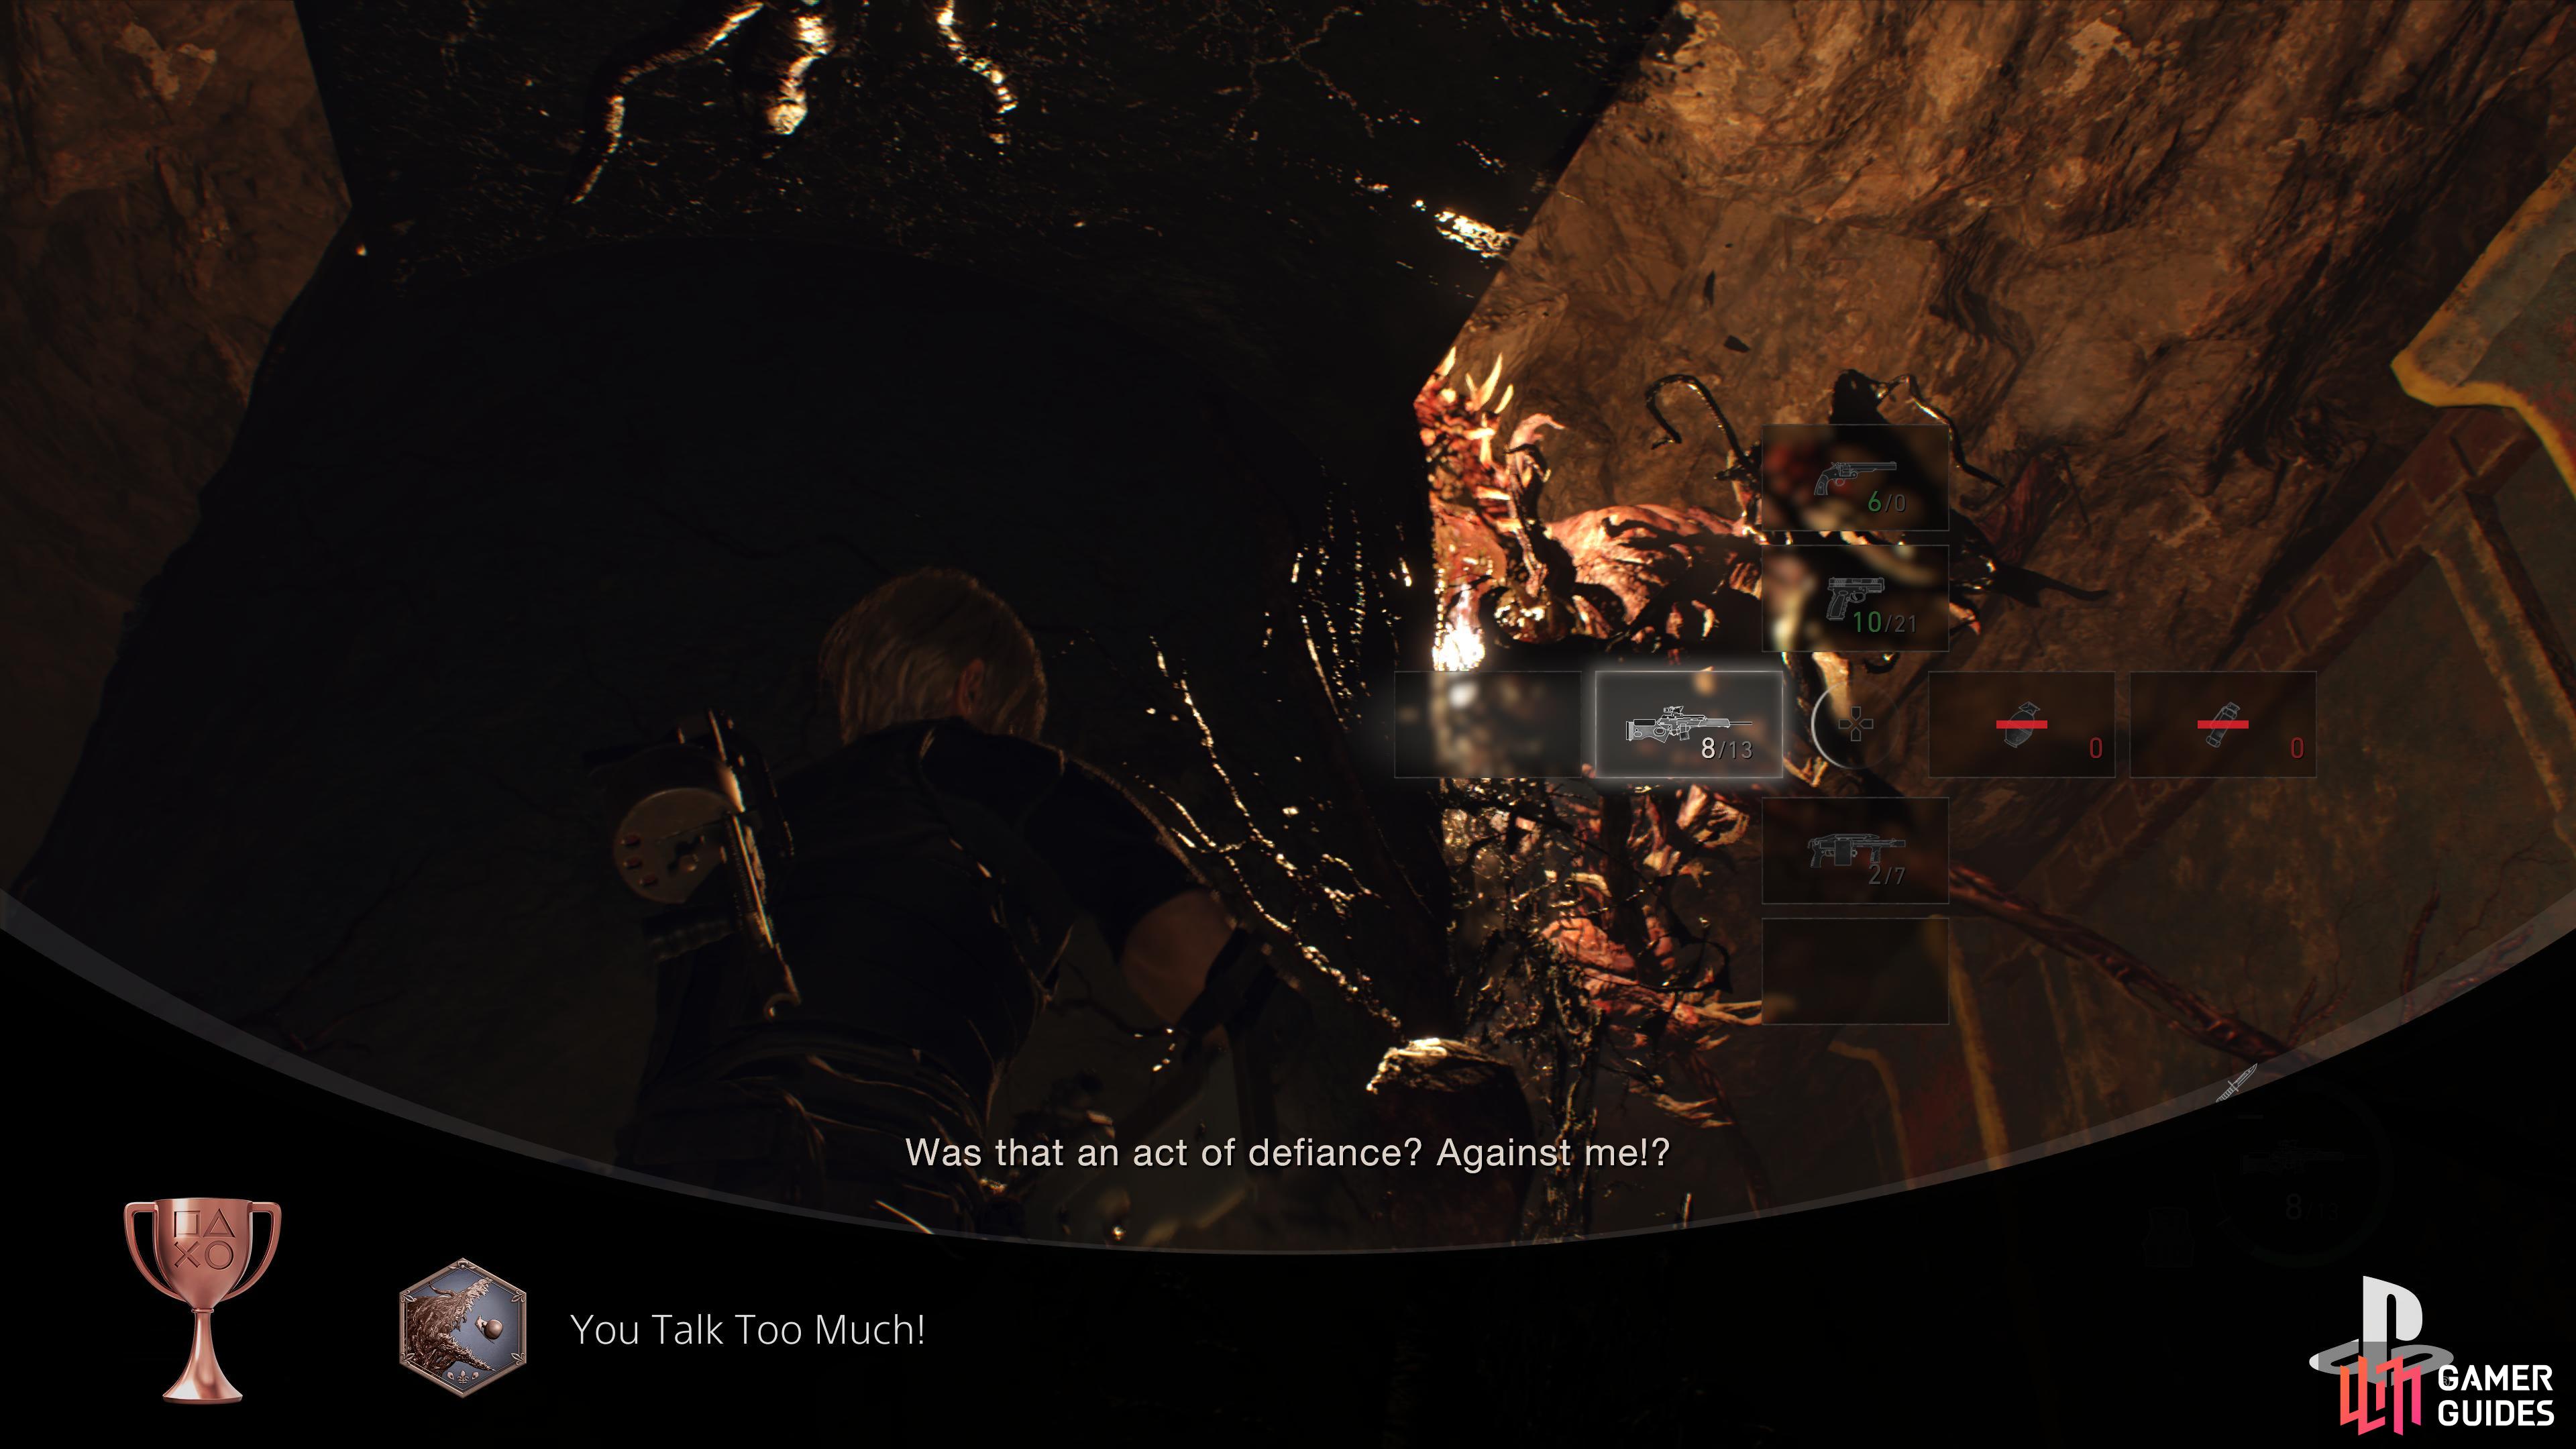 Getting the Resident Evil 4 platinum trophy terrified me — for all